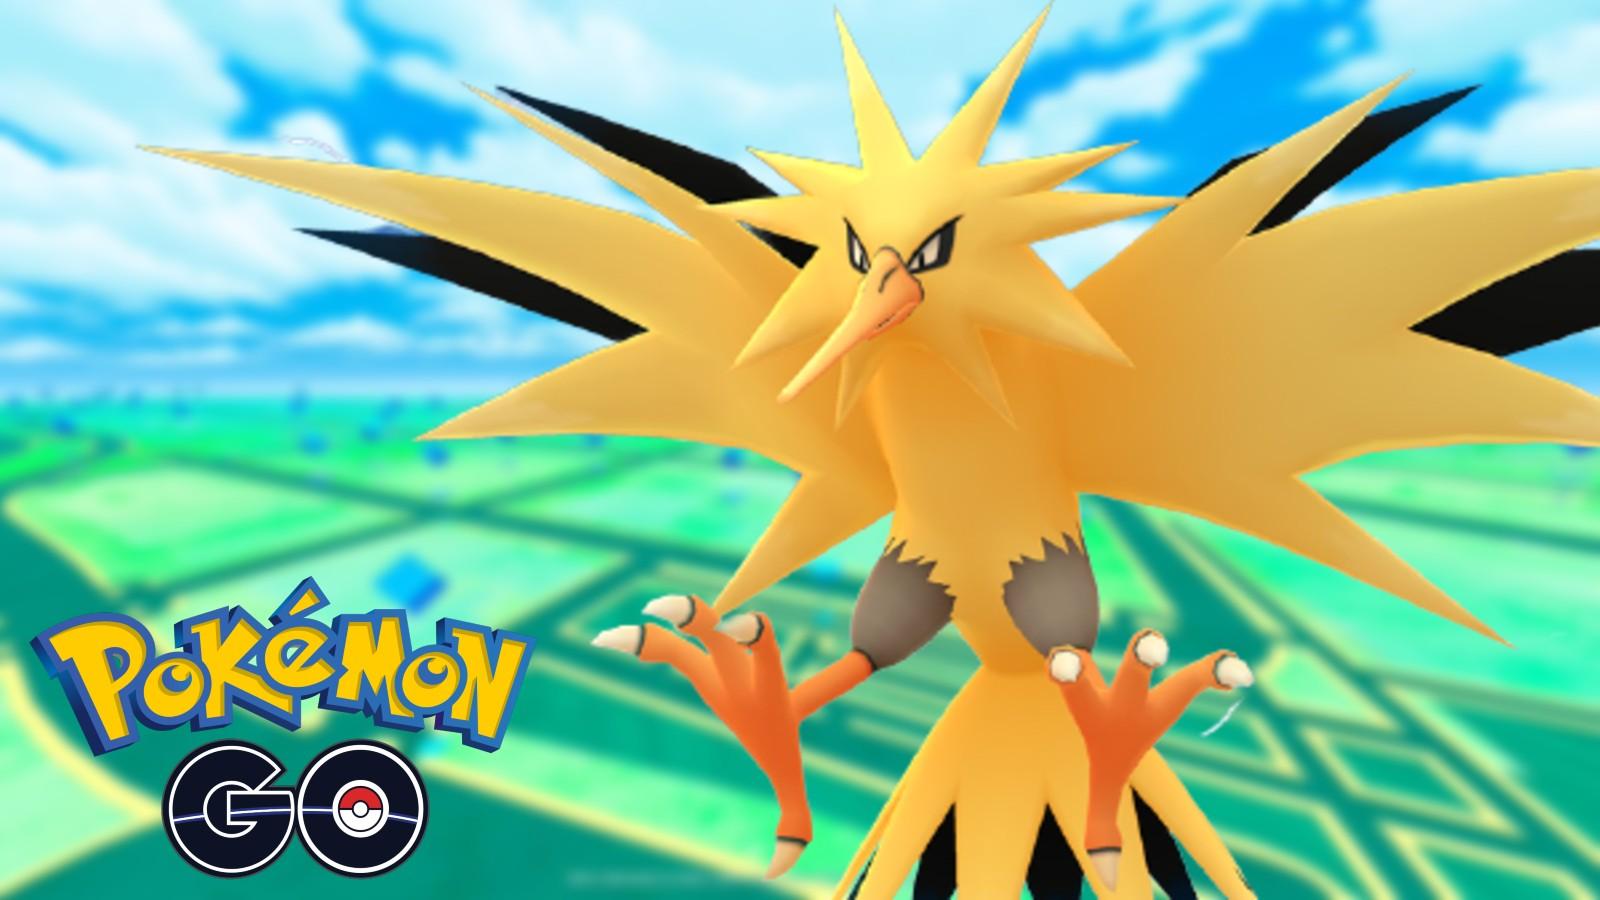 Pokemon Go Shiny Zapdos Day - Start time and Raid news for big event, Gaming, Entertainment